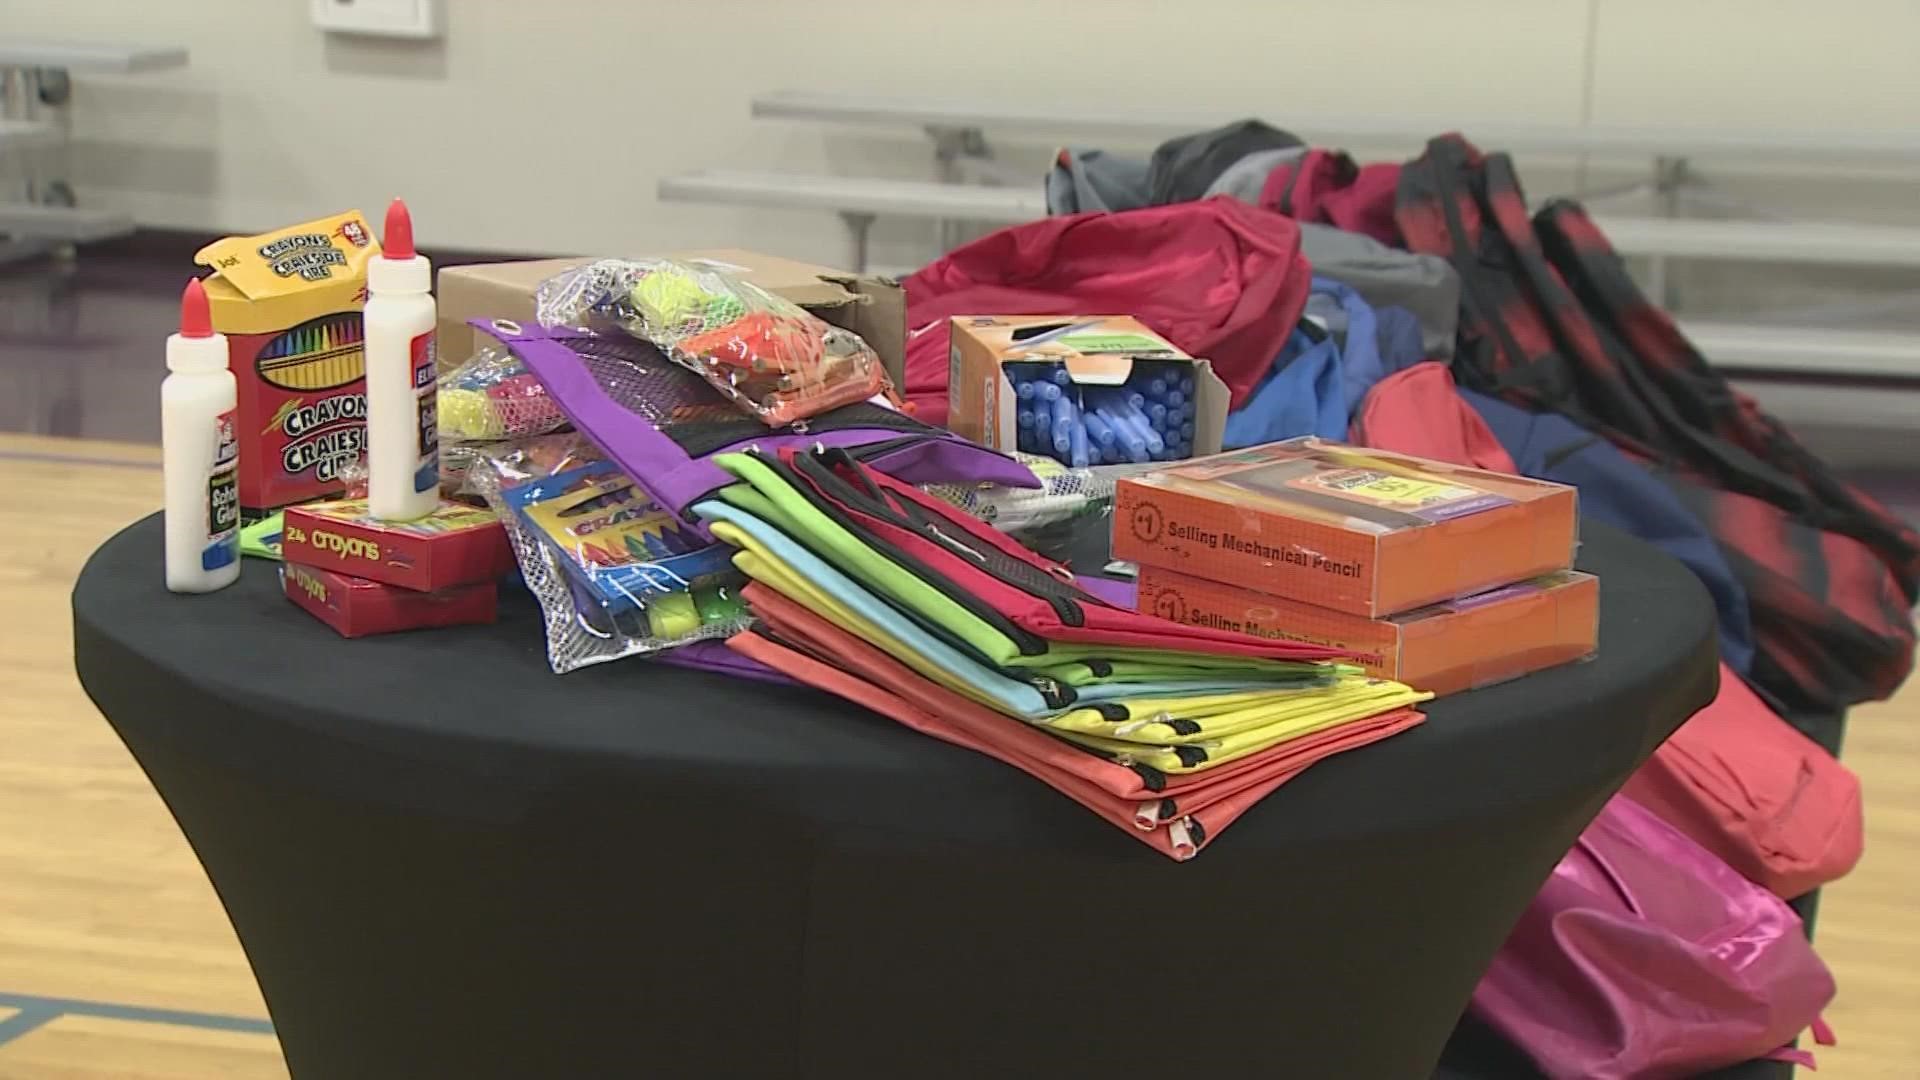 Fort Worth church leaders are doing what they can to help families go back to school safely with the supplies they need.